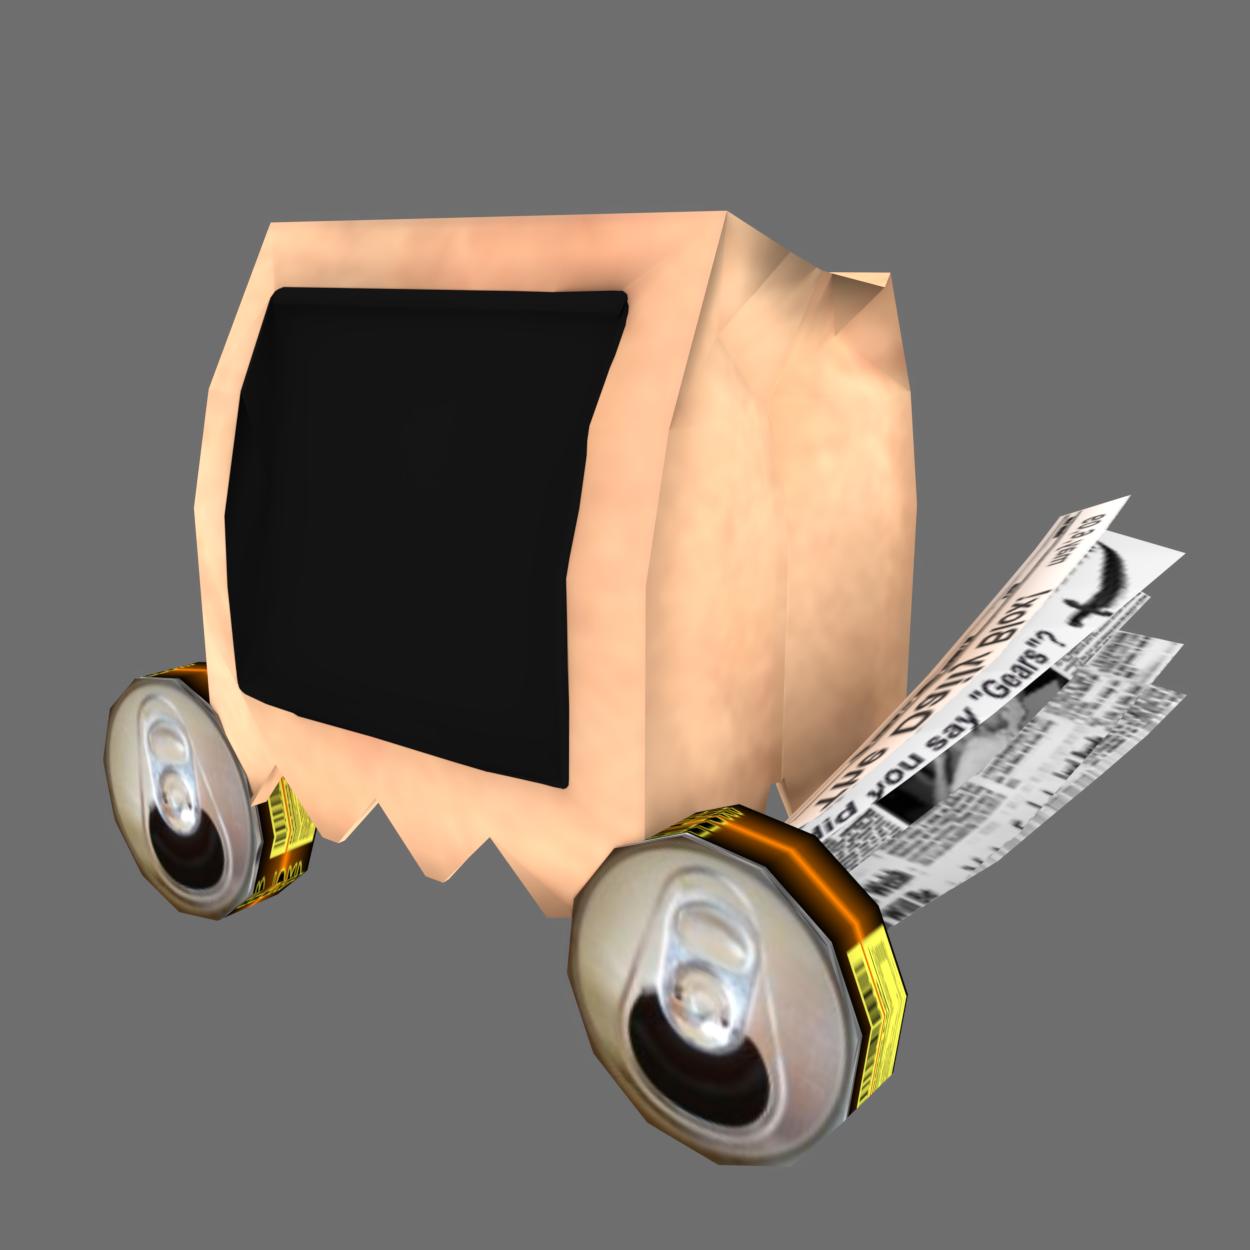 Mas On Twitter Ugc Concept 3 Quisquiliae Dominus Price 1 250r Description What A Bargain Get Your Own From A Dumpster Near You Https T Co Omnncbzwi5 - what dominus are you roblox